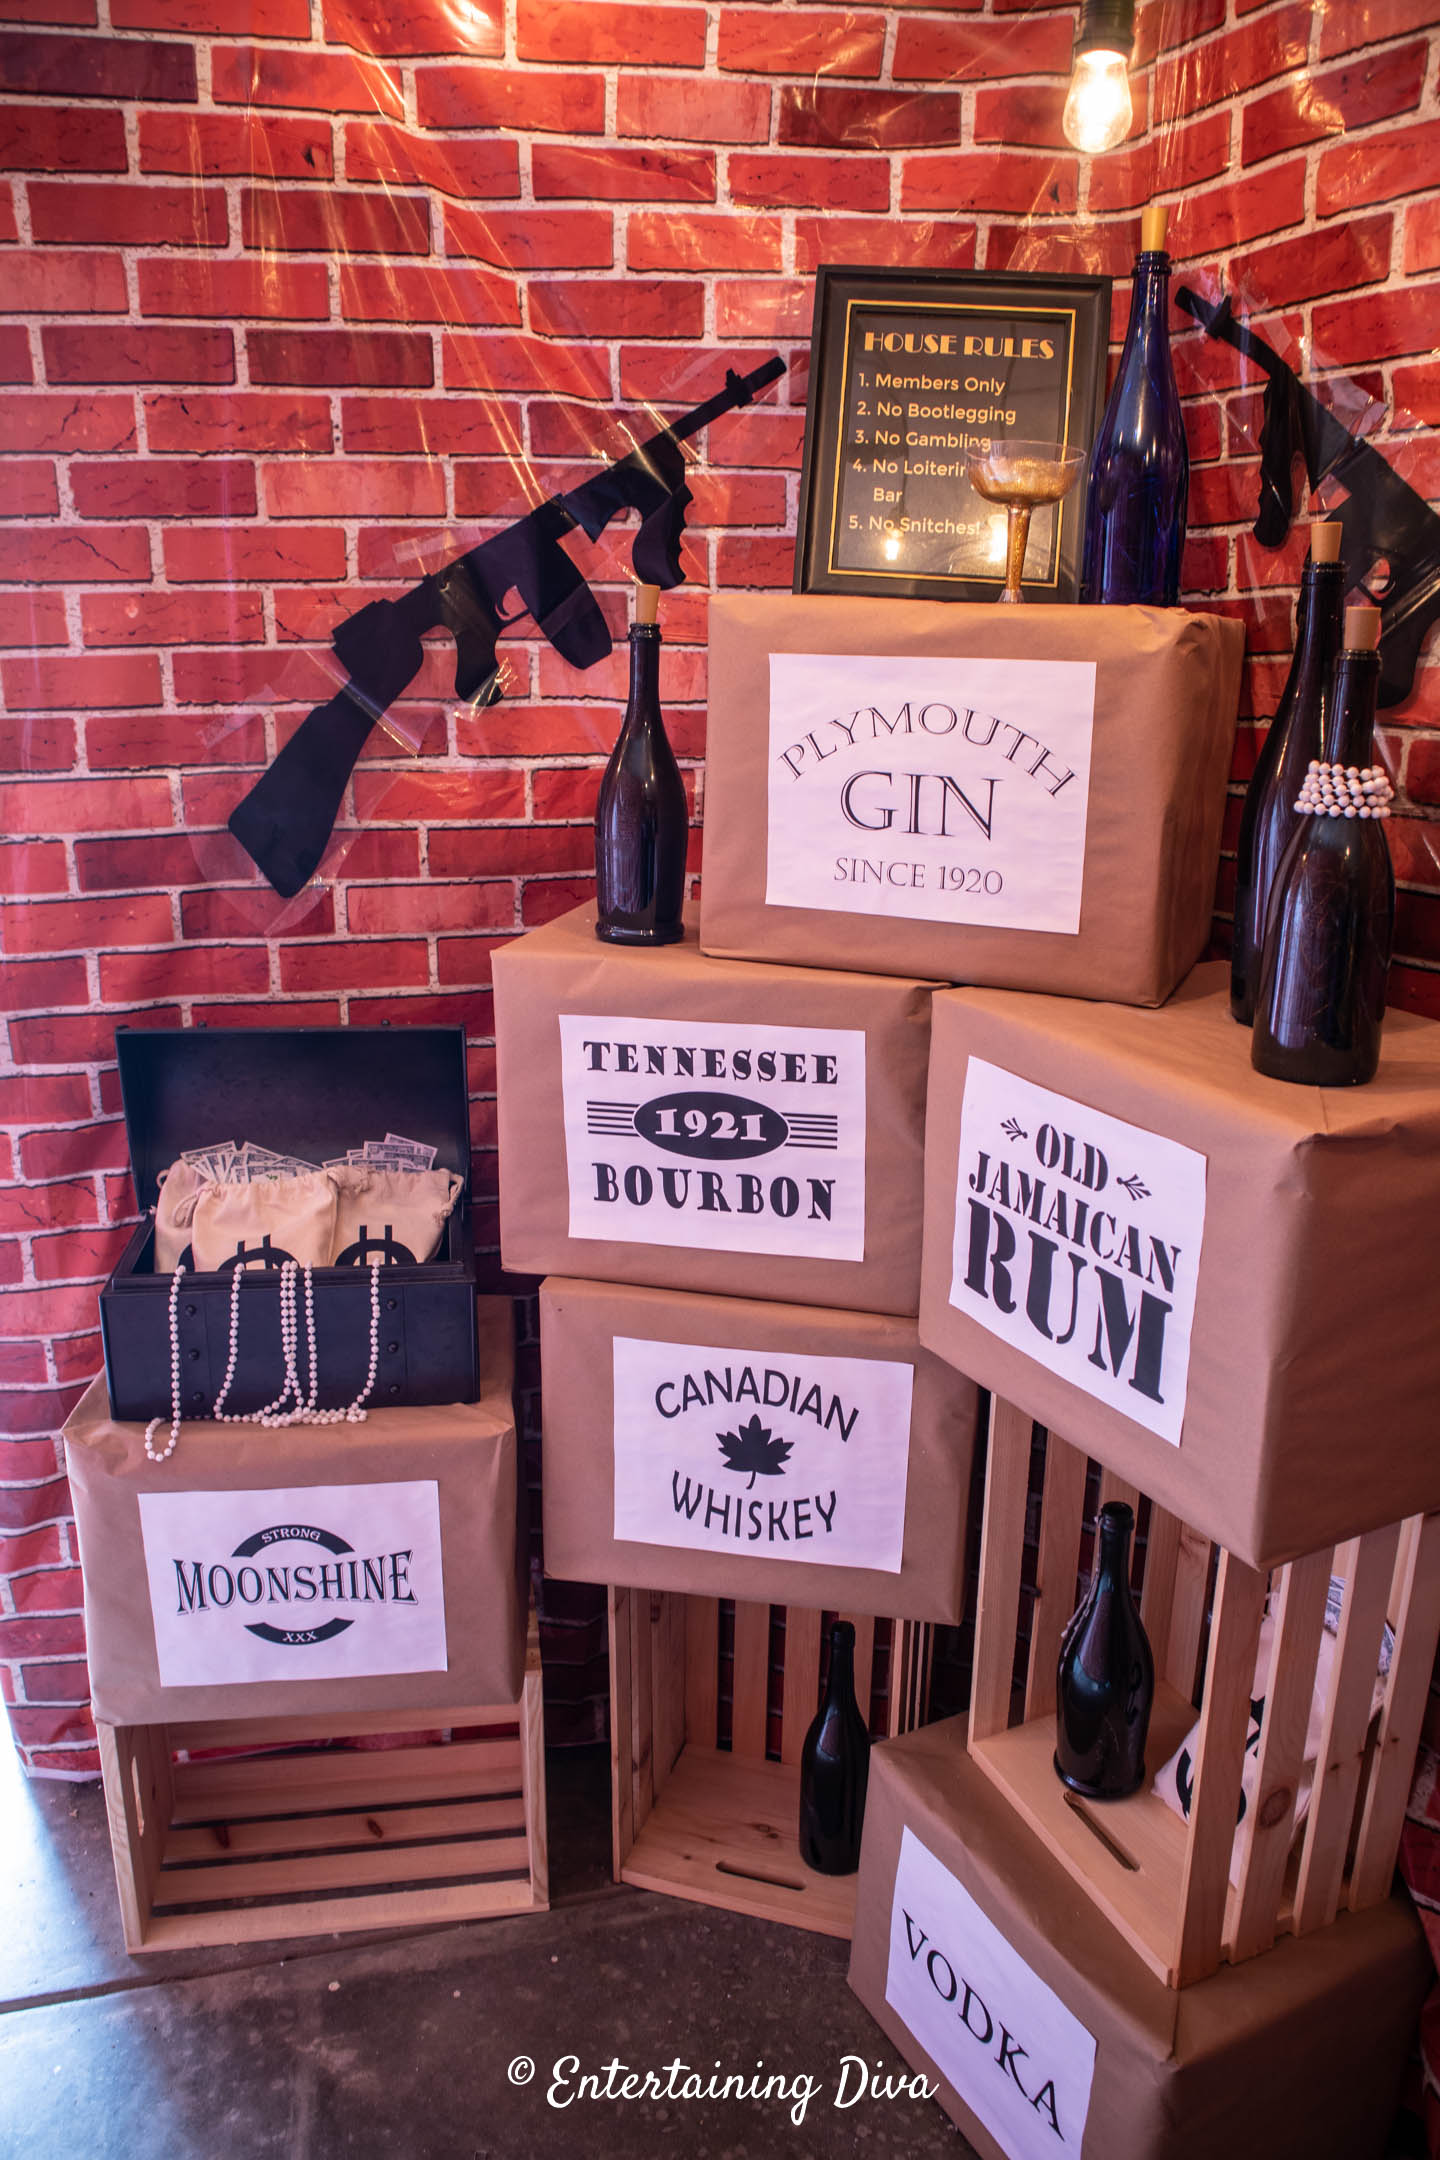 Speakeasy party photo op with cases of liquor, guns and empty wine bottles